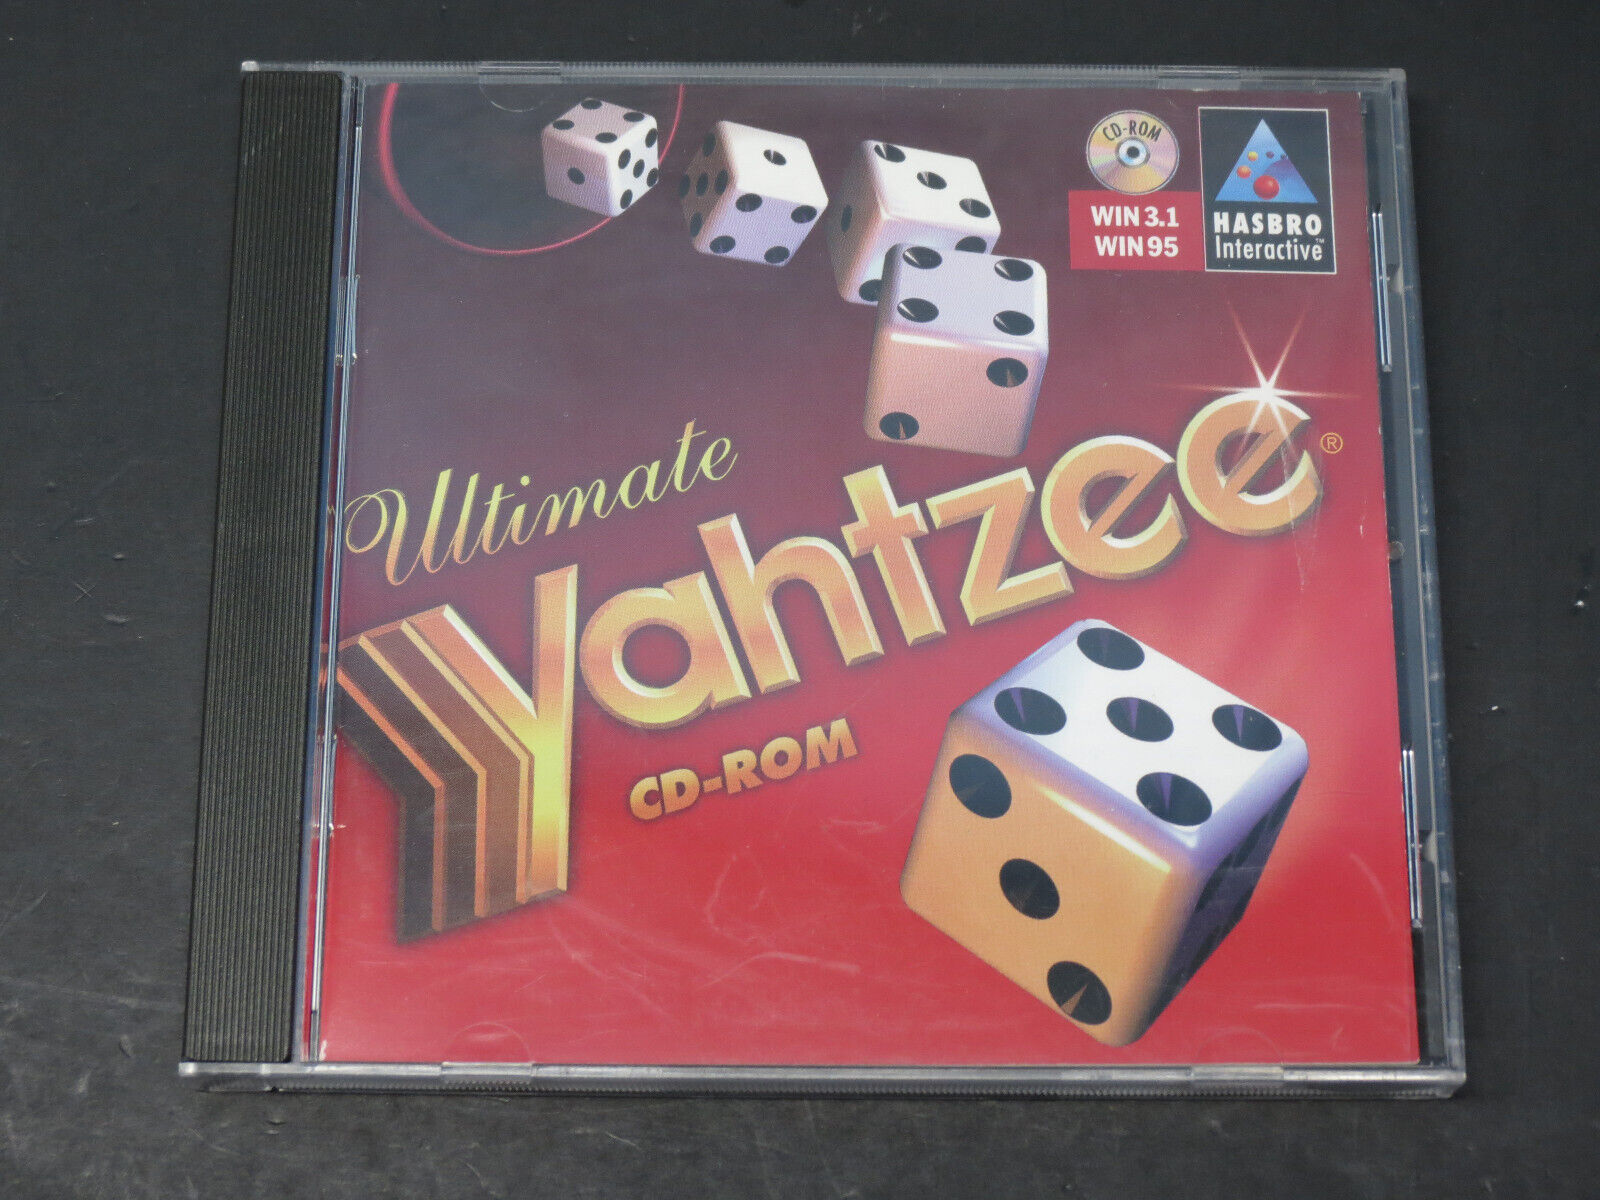 Vintage Ultimate Yahtzee PC Game for Win 3.1/ 95 c.1996 from Hasbro Interactive